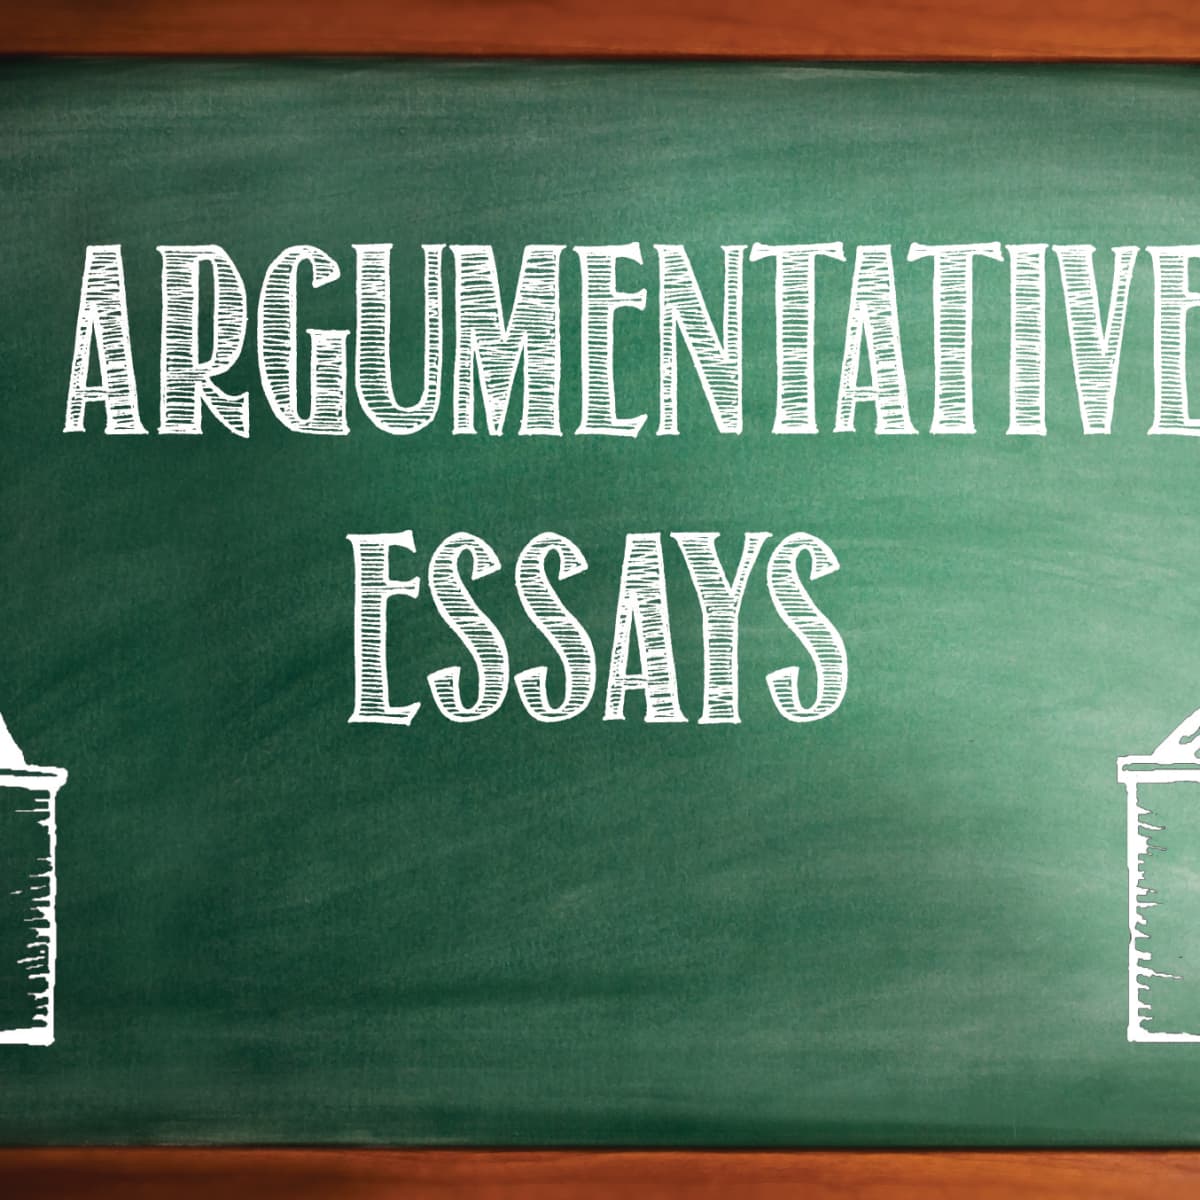 essay writing topics for interview